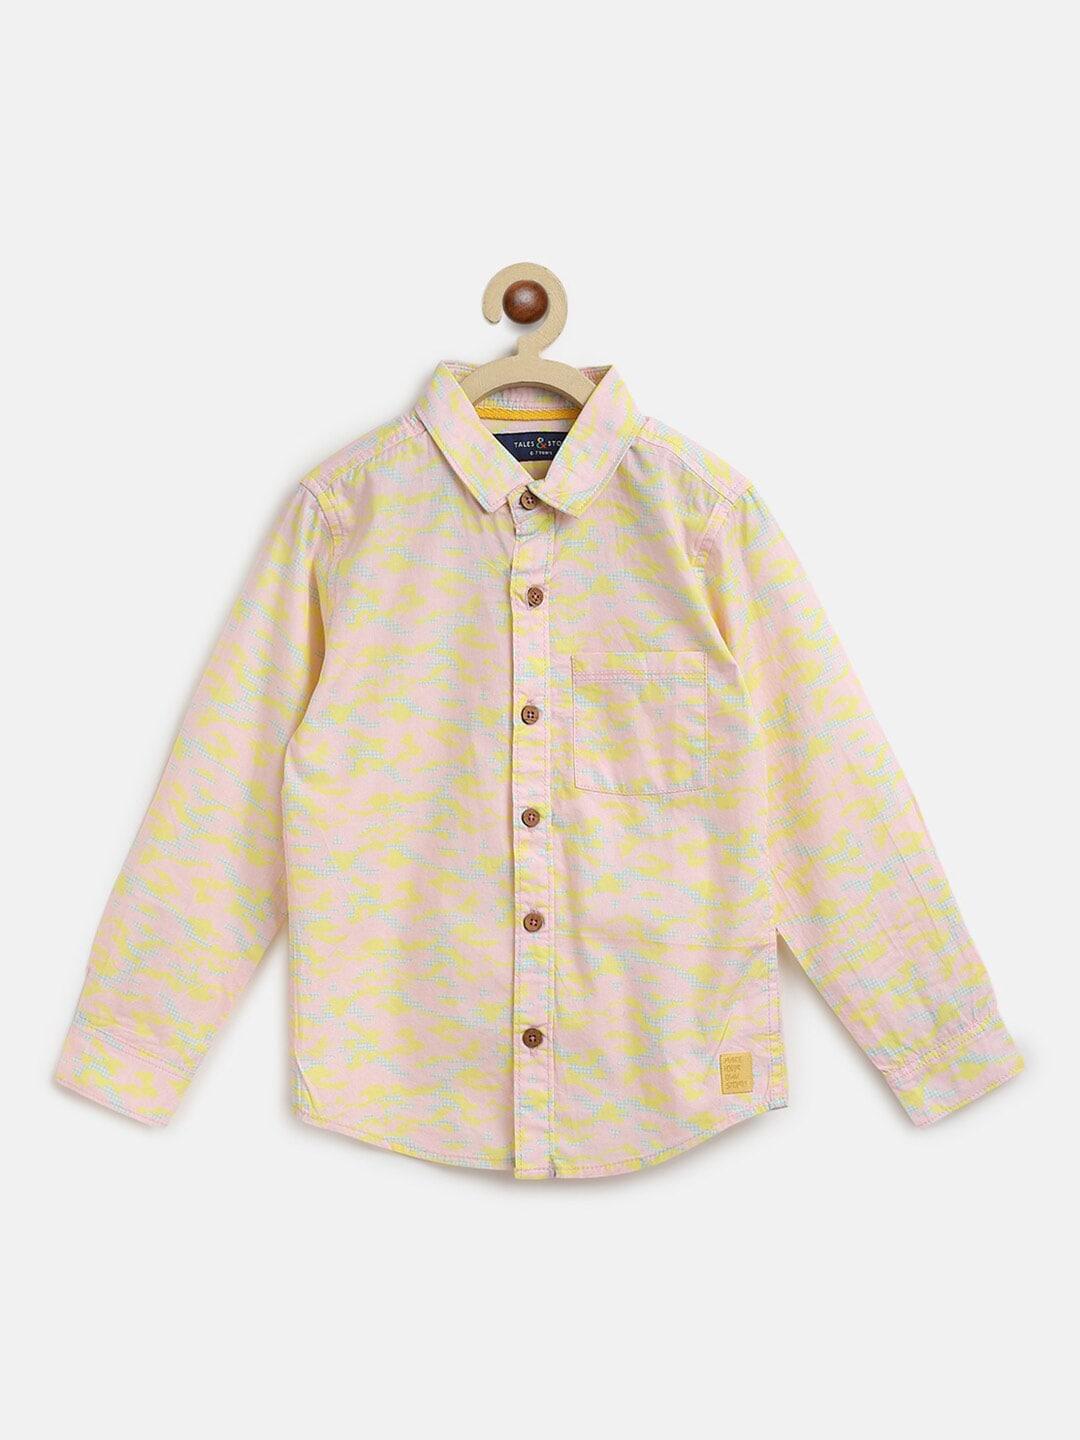 TALES & STORIES Boys Cotton Printed Casual Shirt